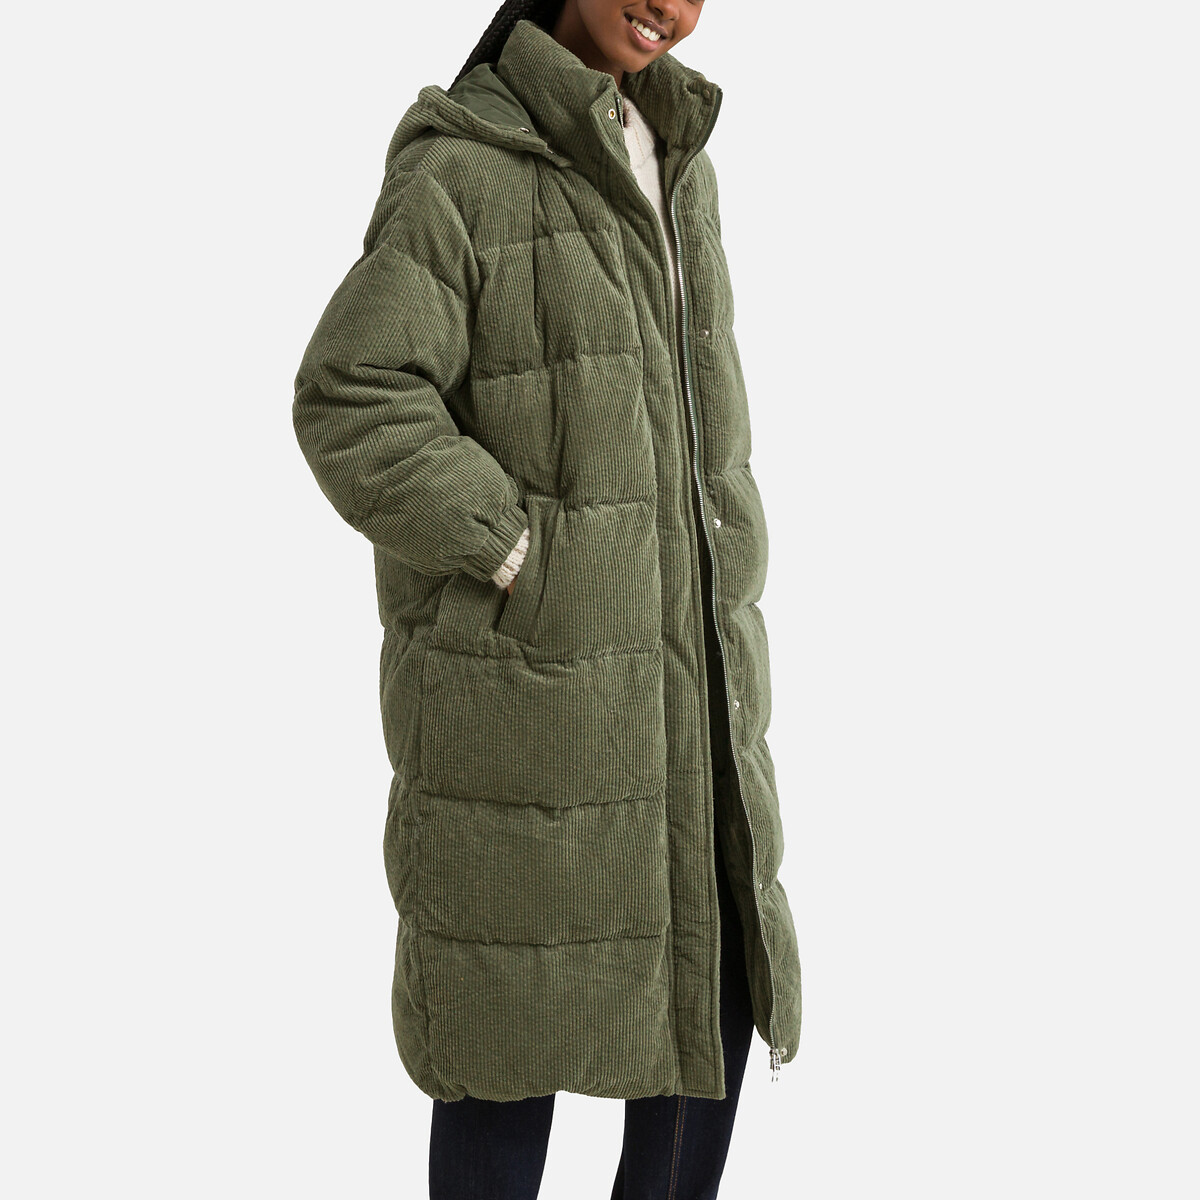 Cotton Long Padded Jacket in Corduroy with Hood